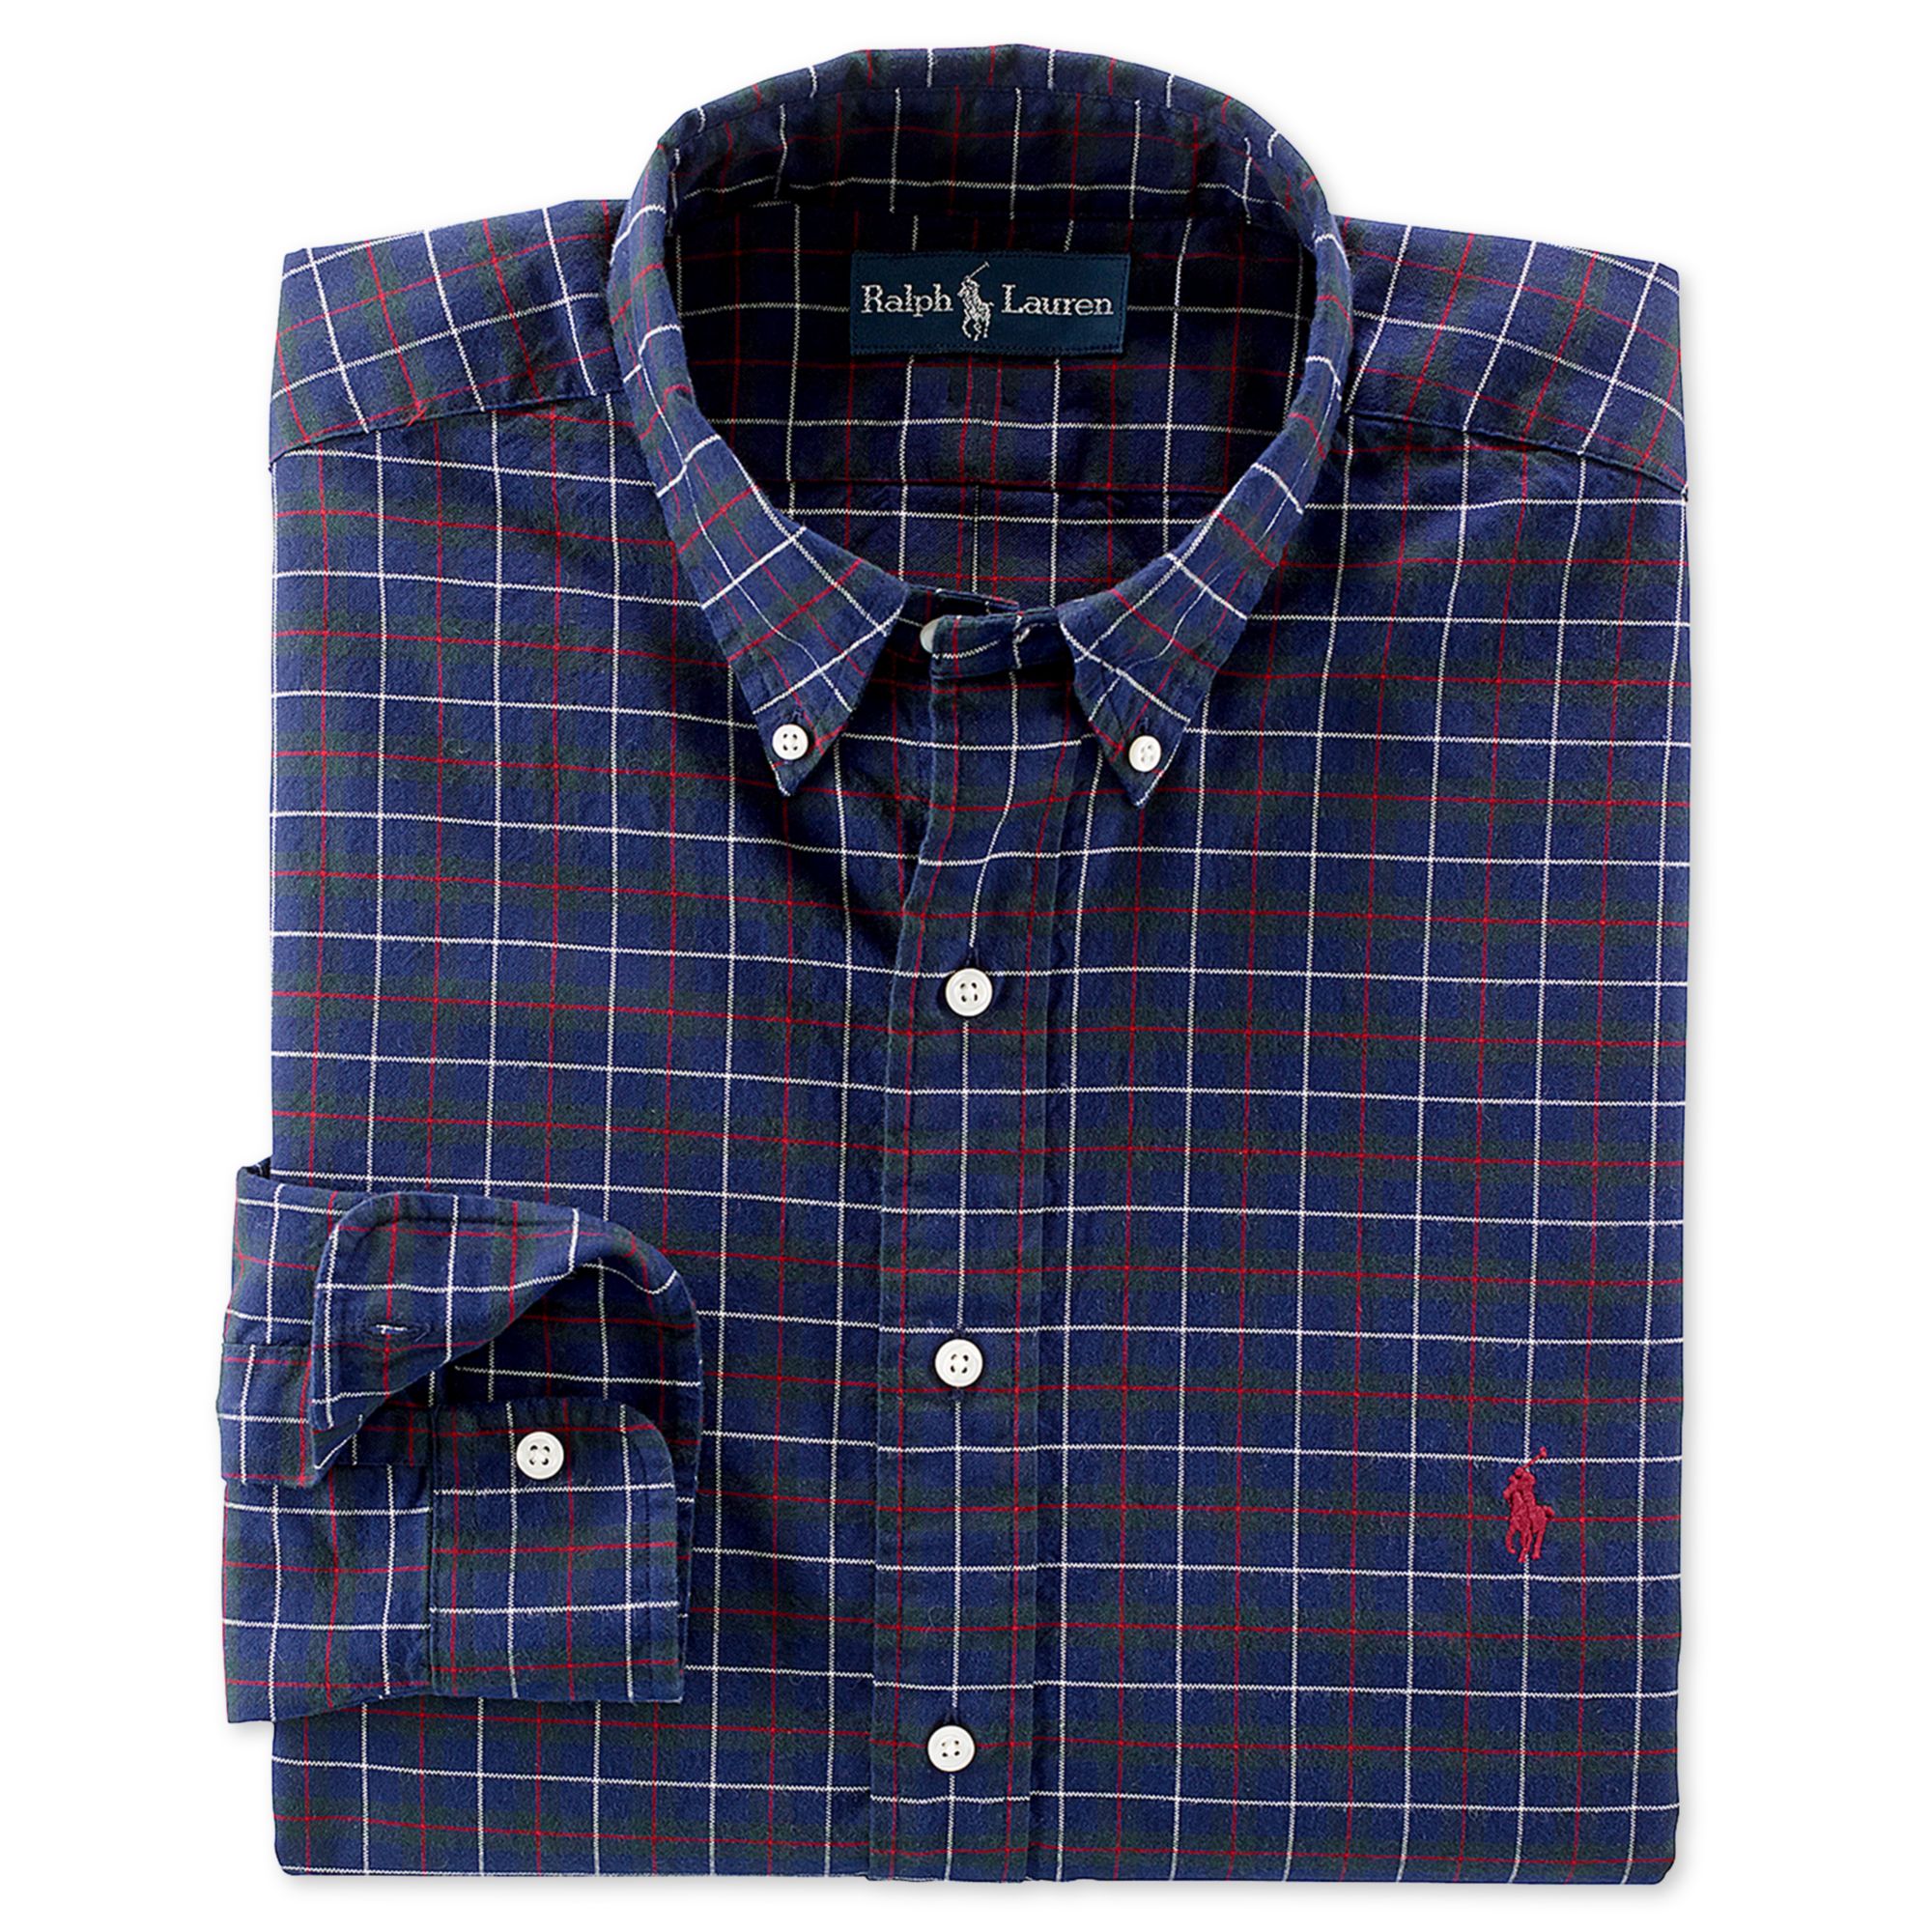 Ralph Lauren Classic Fit Long Sleeve Plaid Brushed Oxford Shirt in Blue